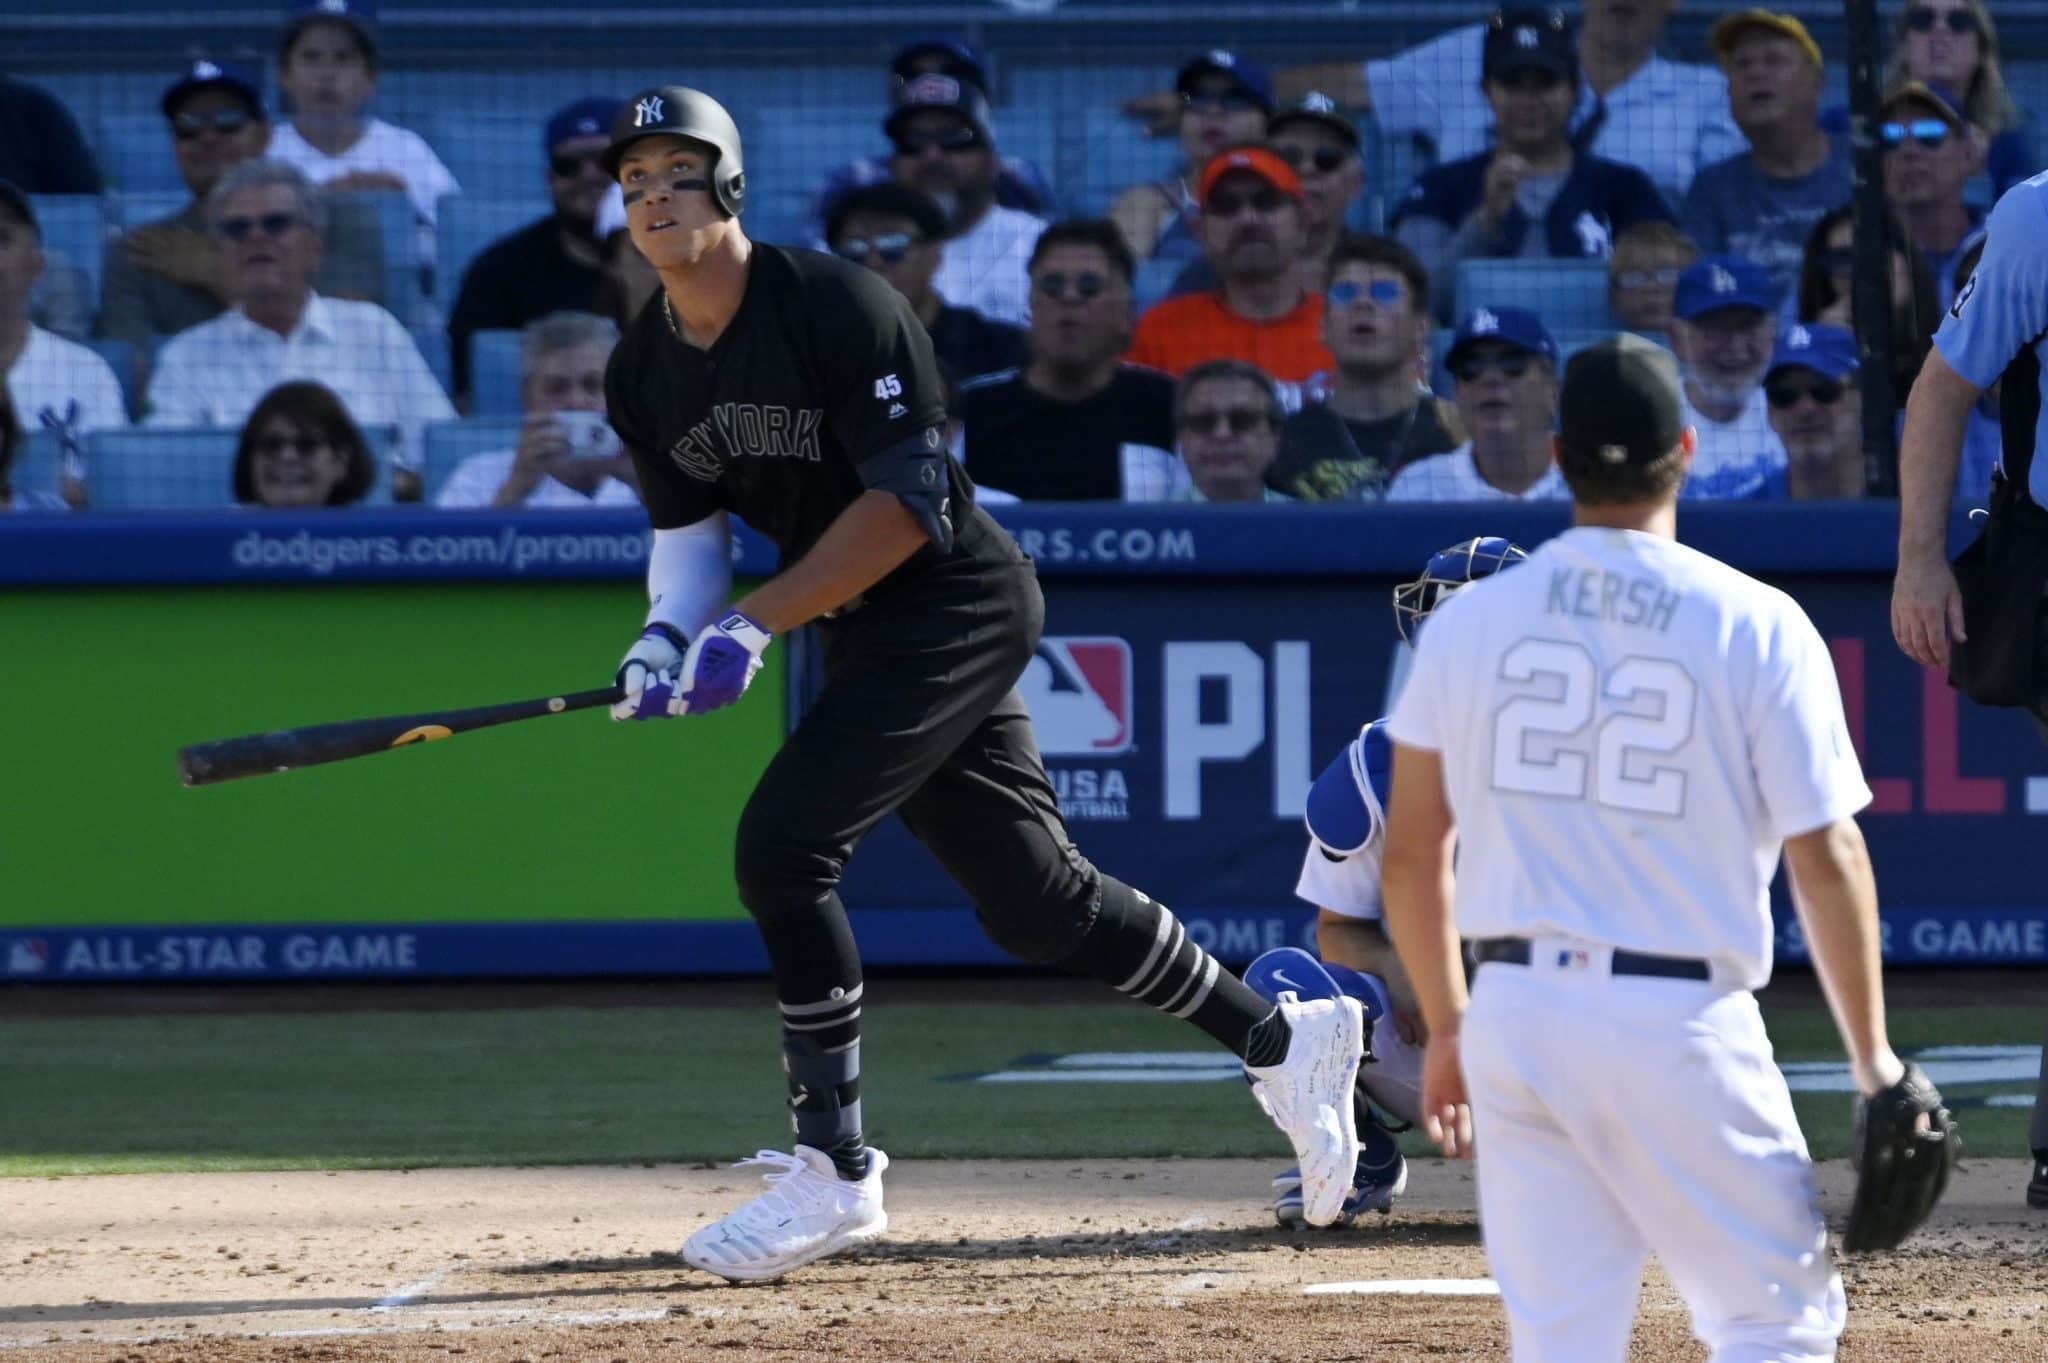 New York Yankees' Aaron Judge, left, runs to first as he hits a solo home run as Los Angeles Dodgers starting pitcher Clayton Kershaw watches during the third inning of a baseball game Sunday, Aug. 25, 2019, in Los Angeles.